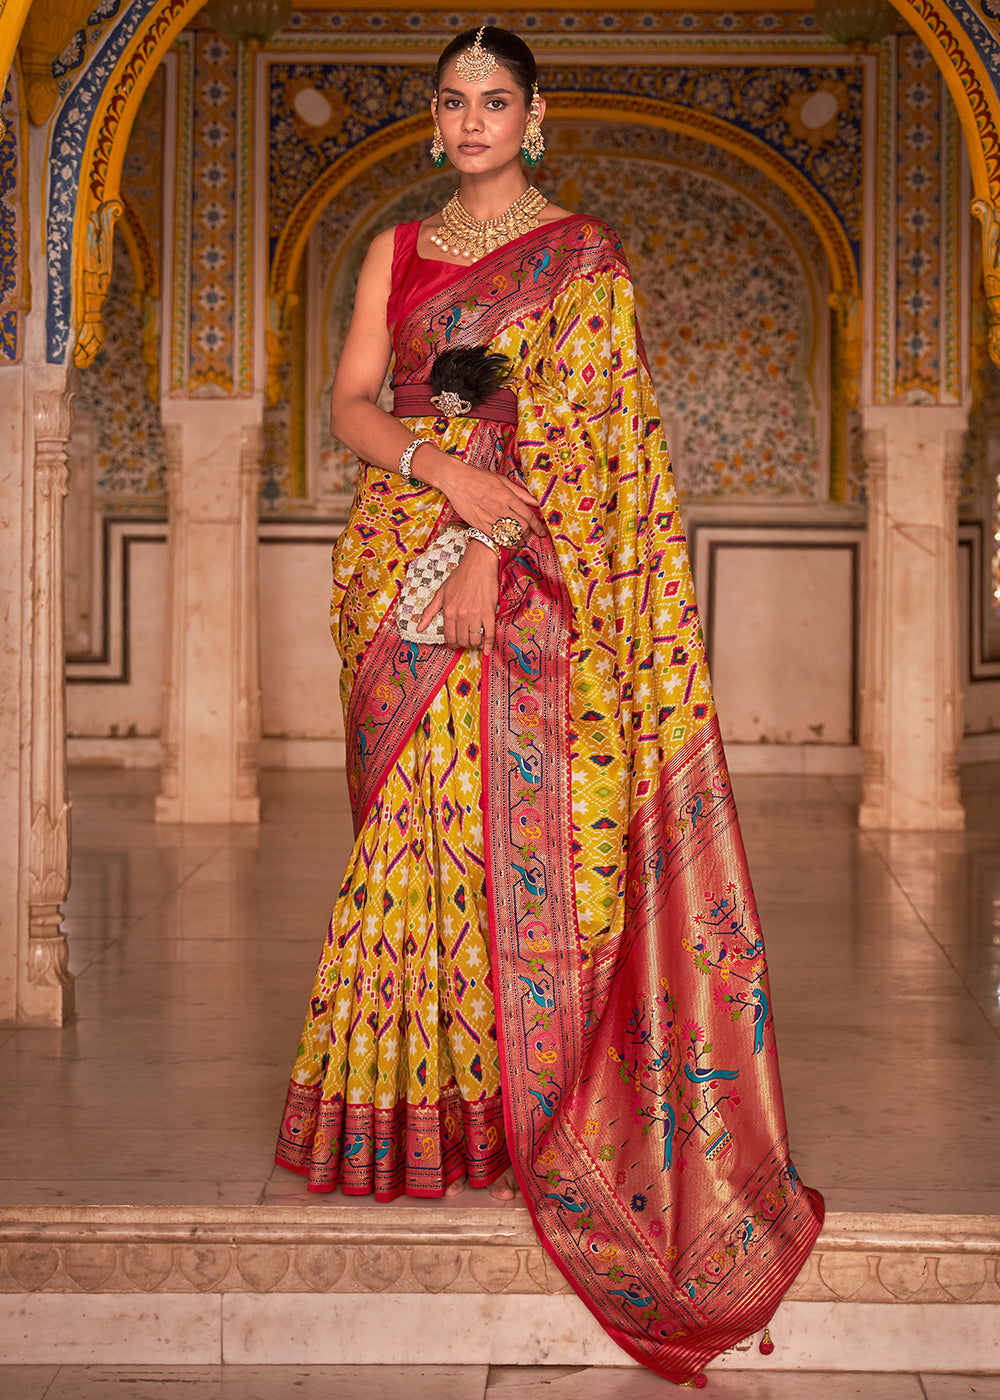 Radiant Yellow Patola Silk Saree - Perfect Blend of Elegance and Tradition